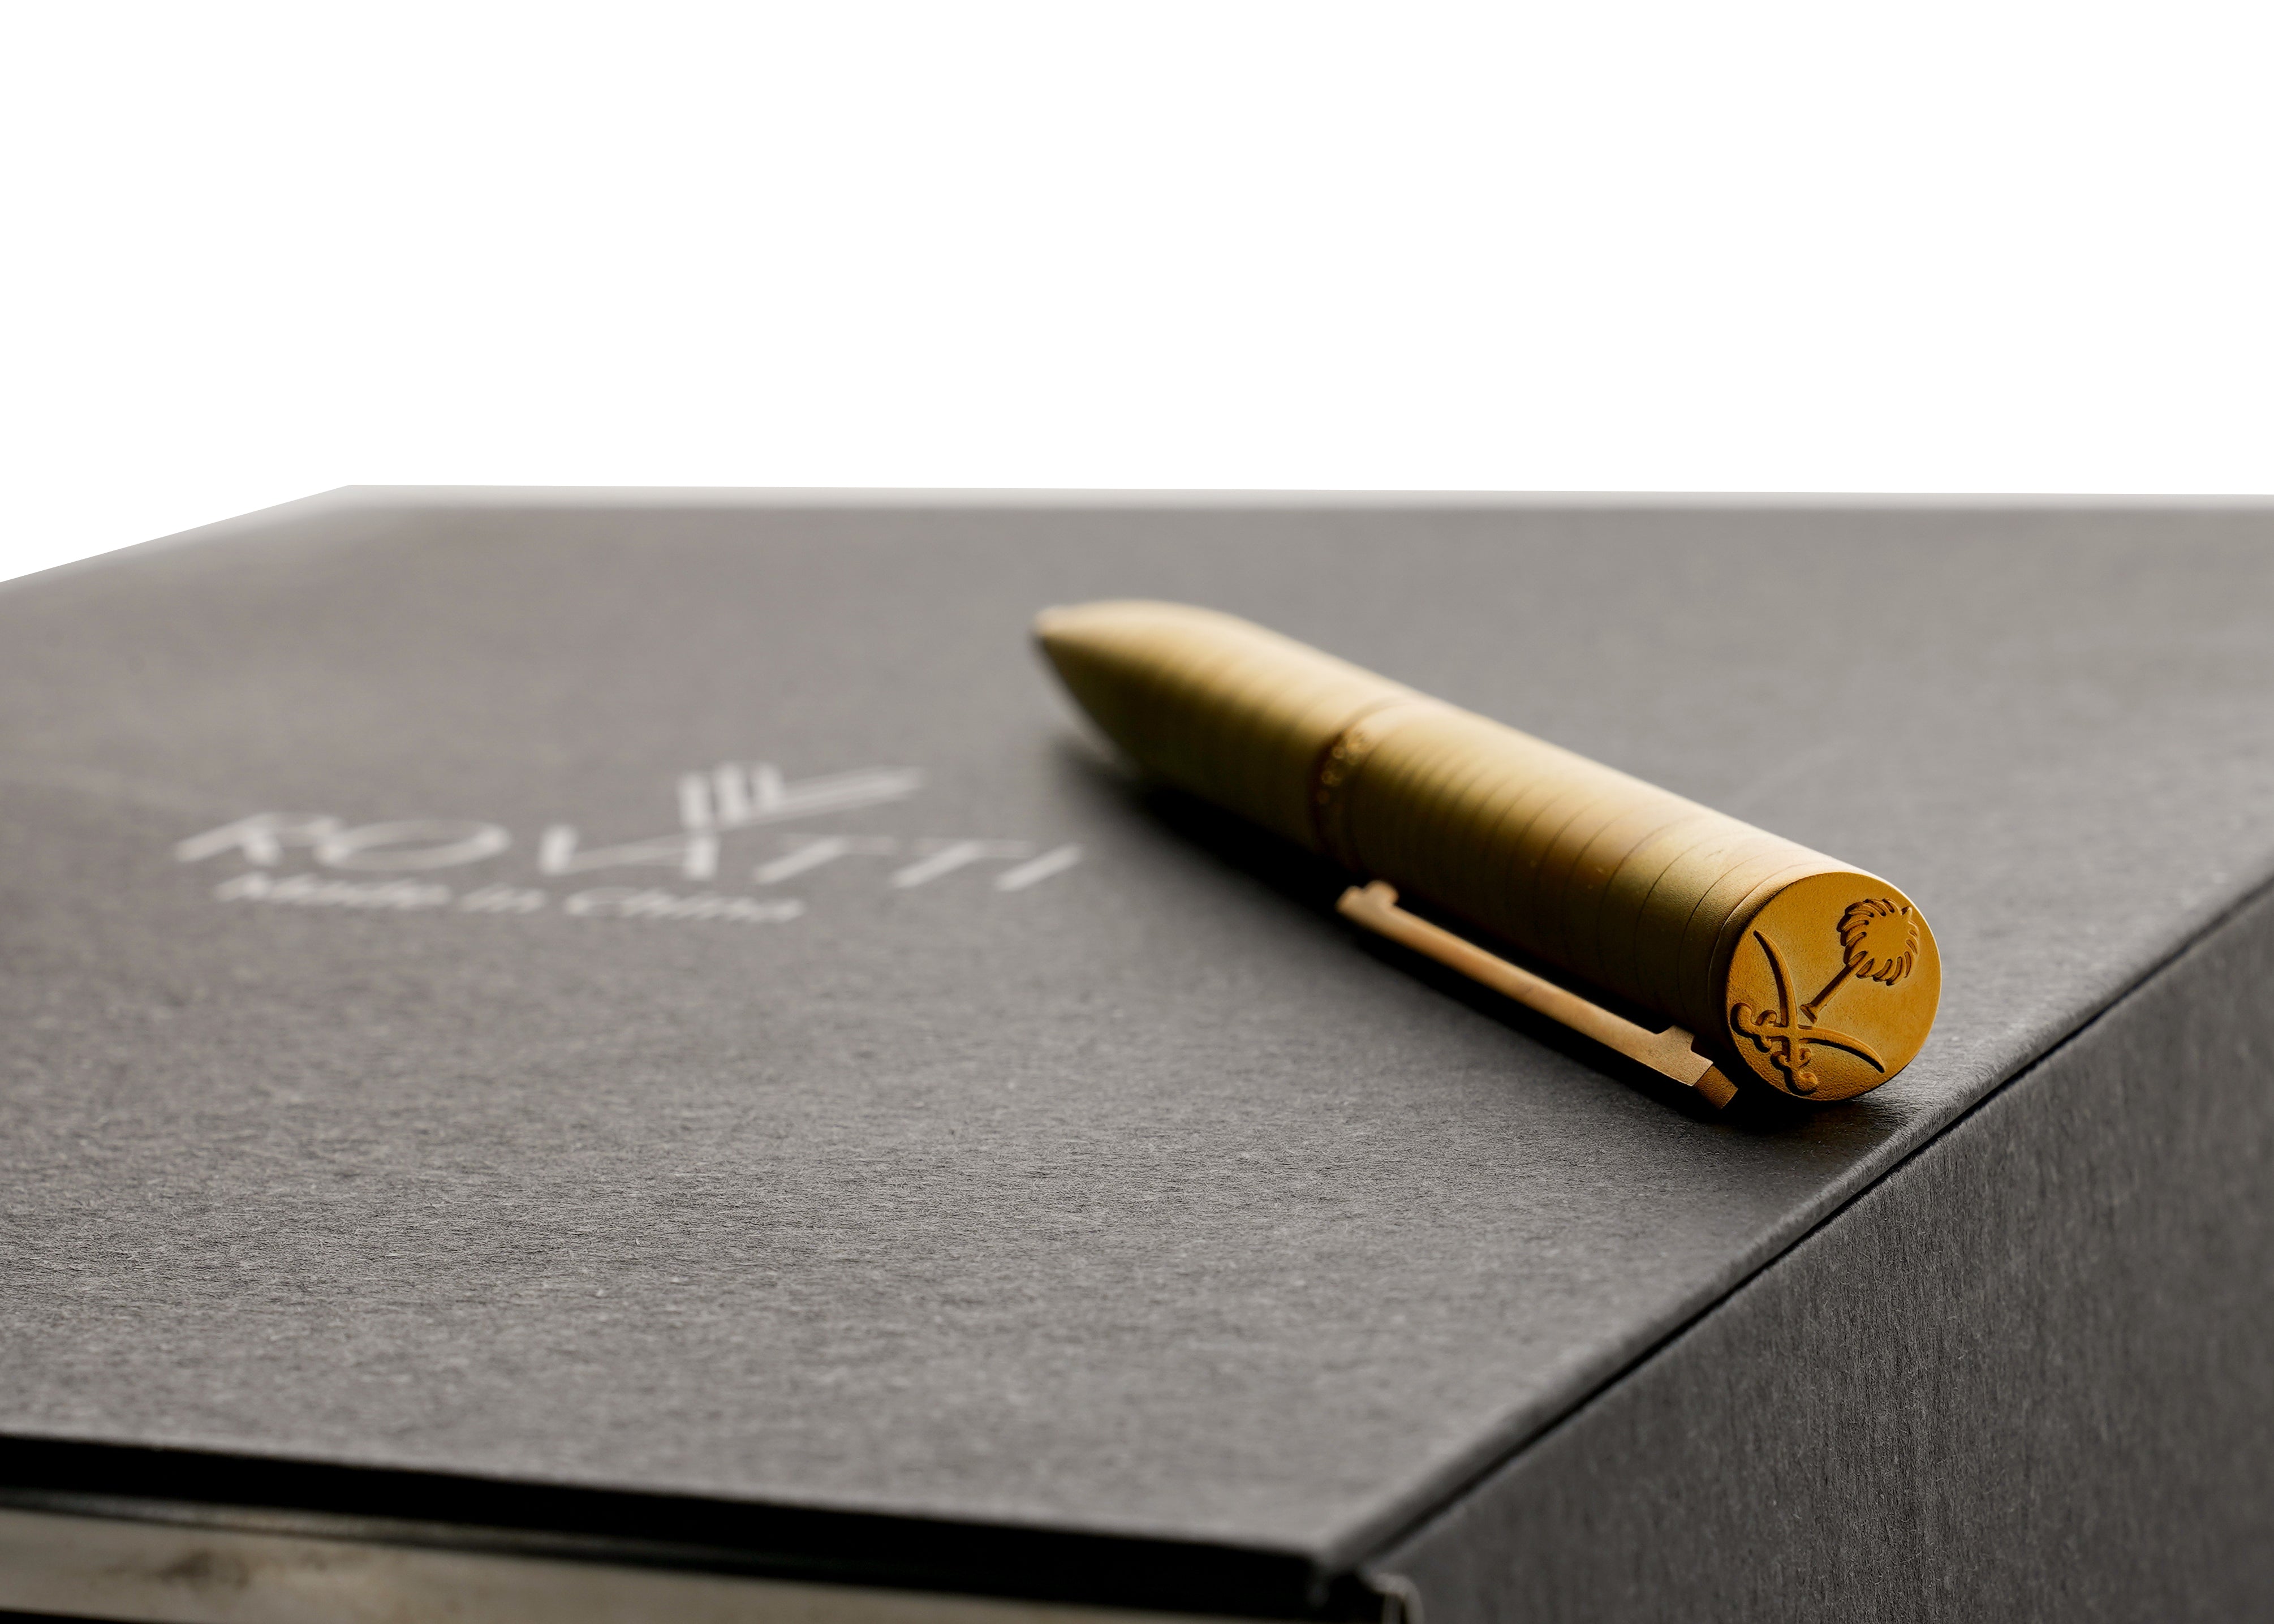 Rovatti KSA Pen | best stationary gifts | gifts for her or him